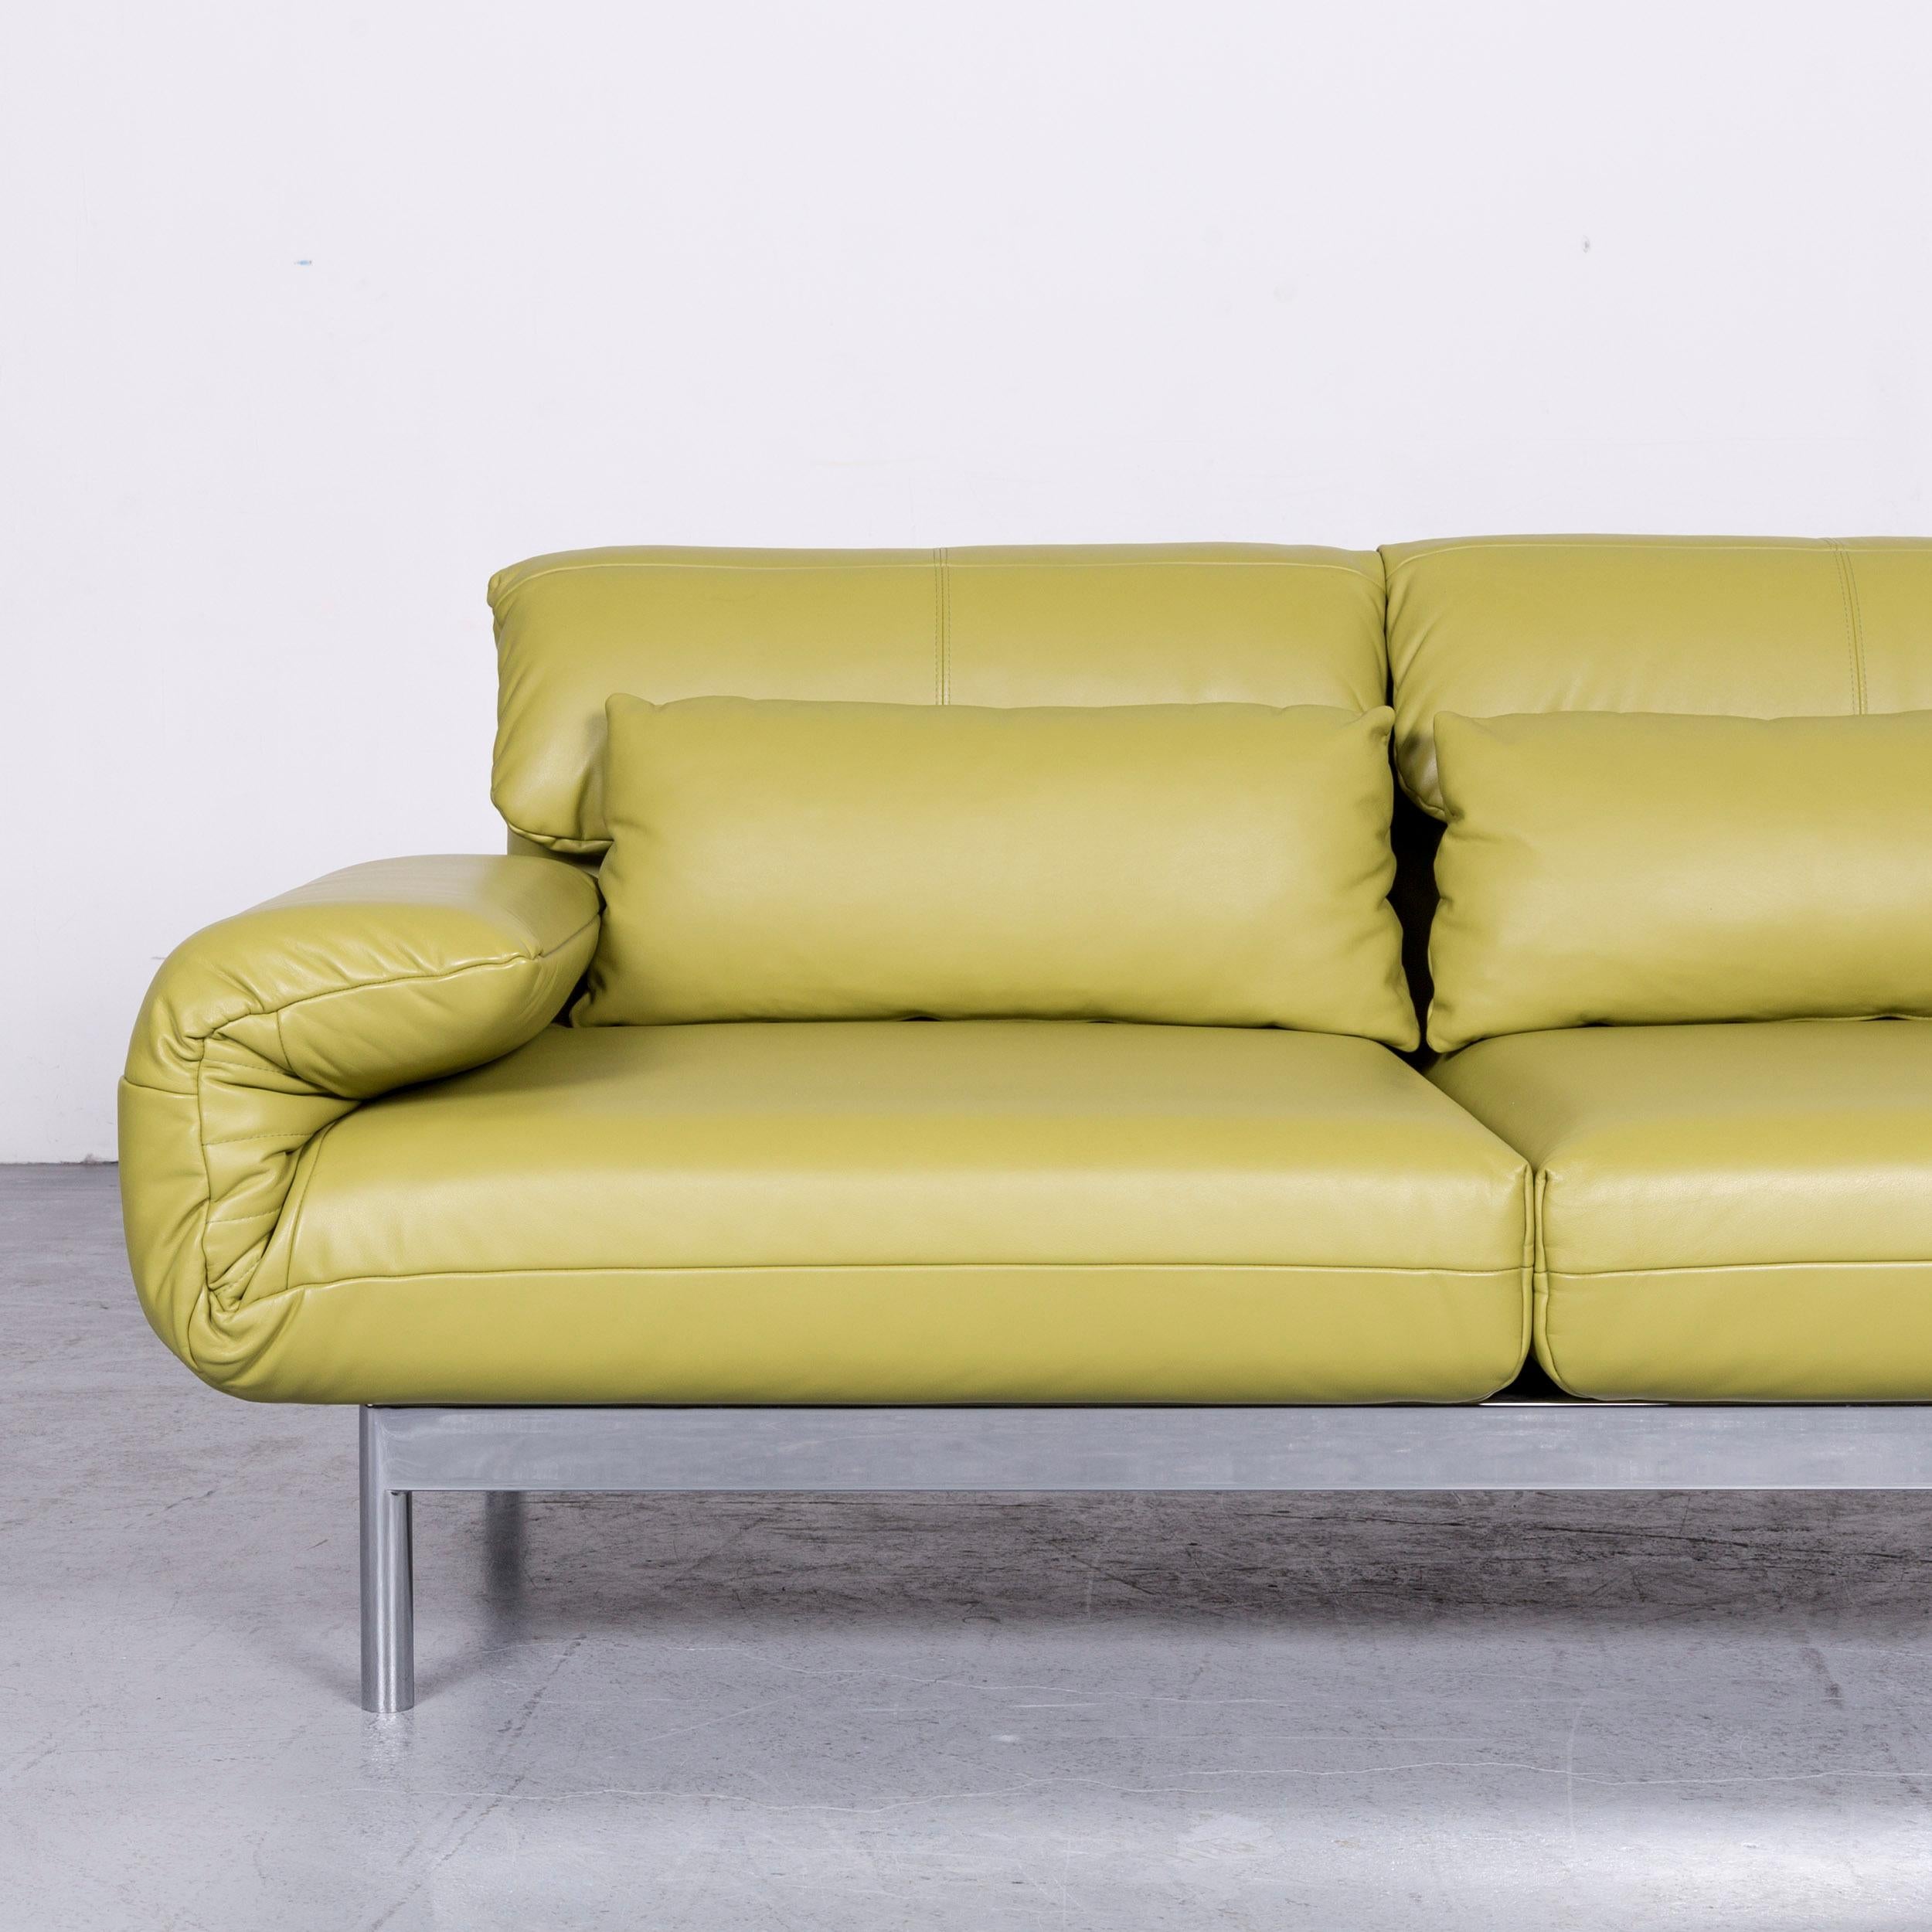 Rolf Benz Plura Designer Sofa Leather Green Relax Function Couch Modern 2